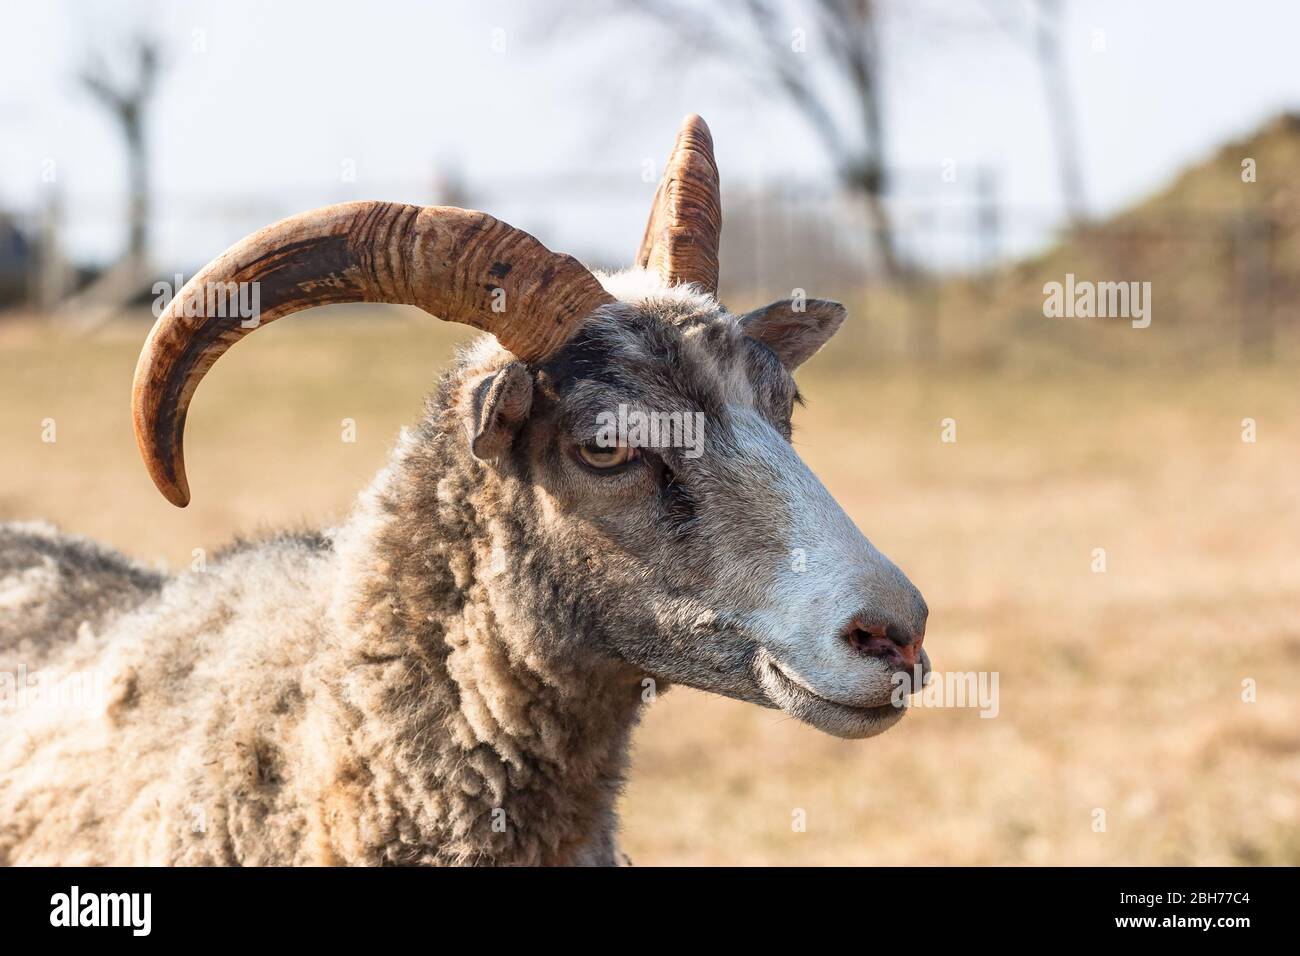 Closeup of a sheep with horns Stock Photo